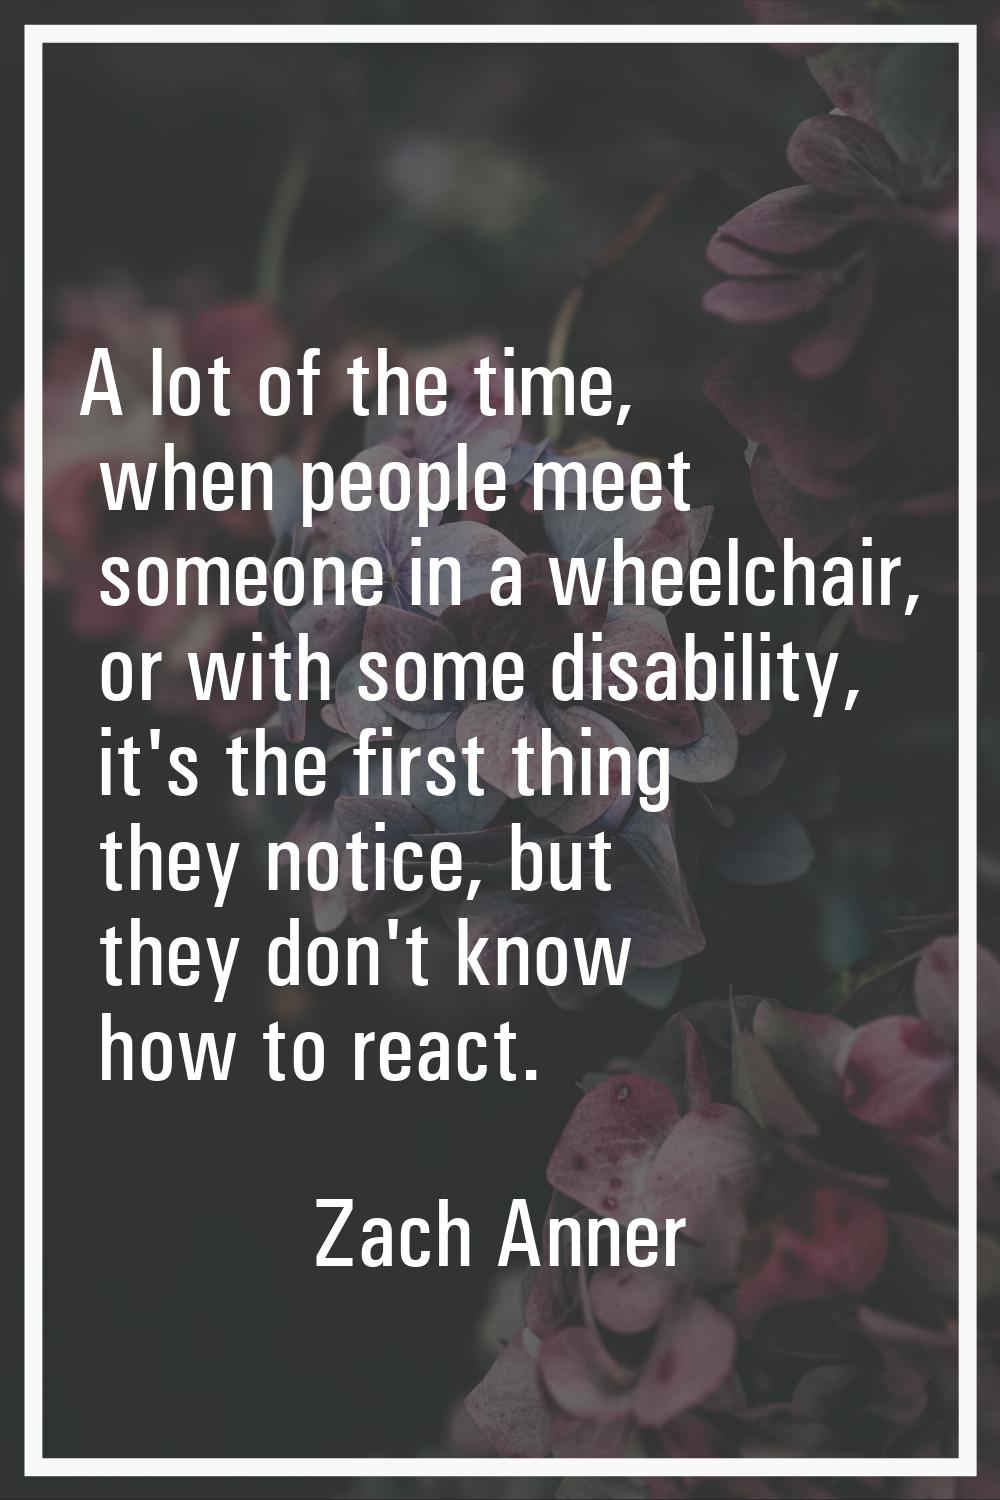 A lot of the time, when people meet someone in a wheelchair, or with some disability, it's the firs